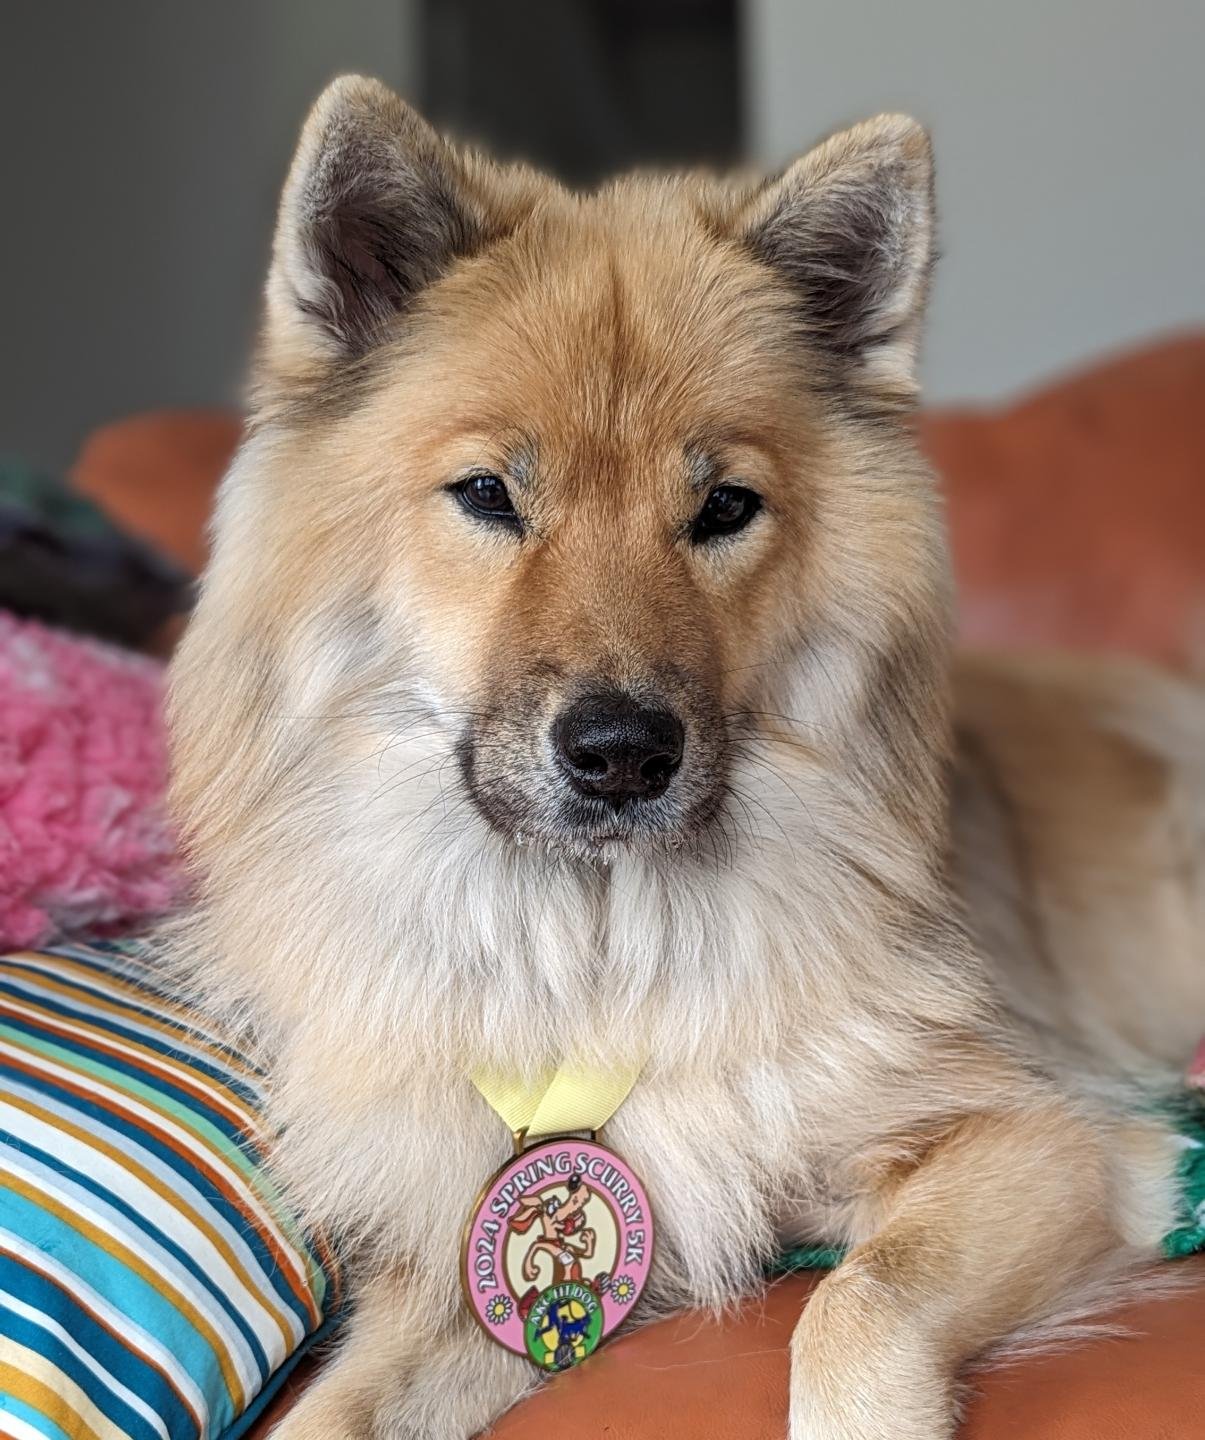 Our resident matriarch Lili 👑 spent part of her birthday on a long walk with me that doubled for her AKC Spring Scurry participation, and with that, also earned her Fit Dog Bronze 🥳. I'm also going to work towards the next Fit Dog title with her ov